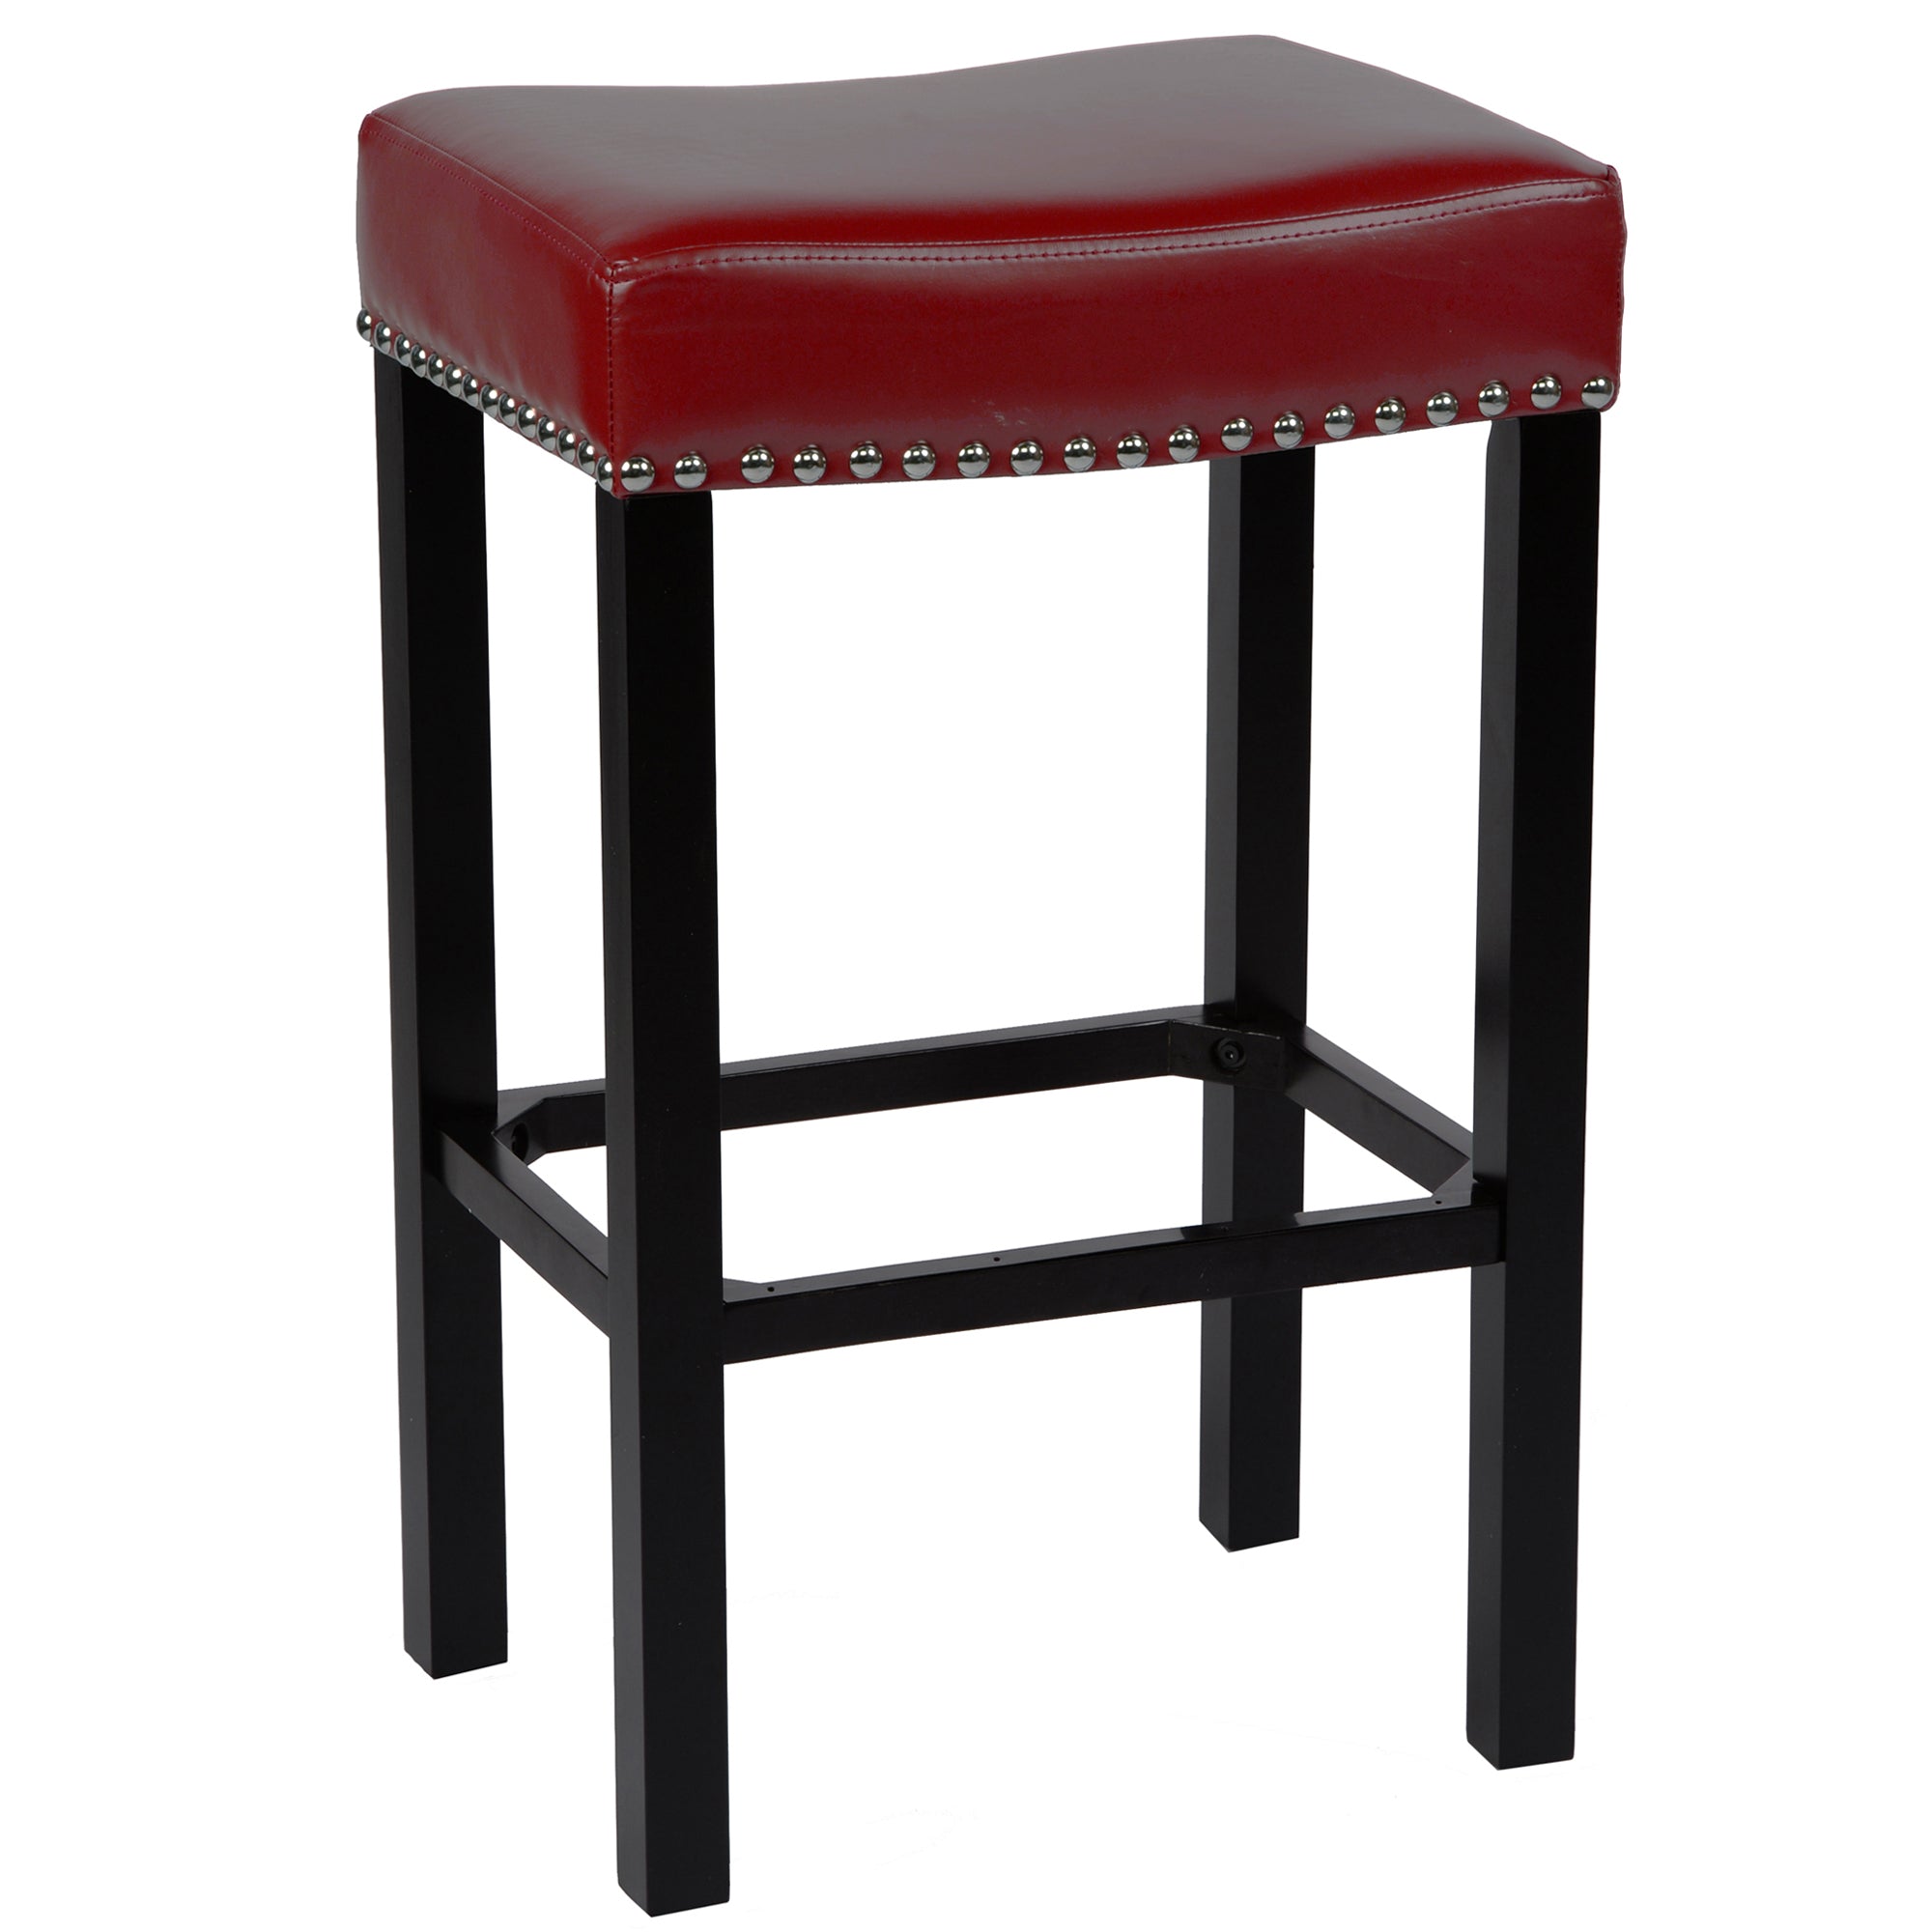 Armen Living Lcmbs013bare26 Tudor 26" Backless Stationary Barstool In Red Bonded Leather With Chrome Nailhead Accents